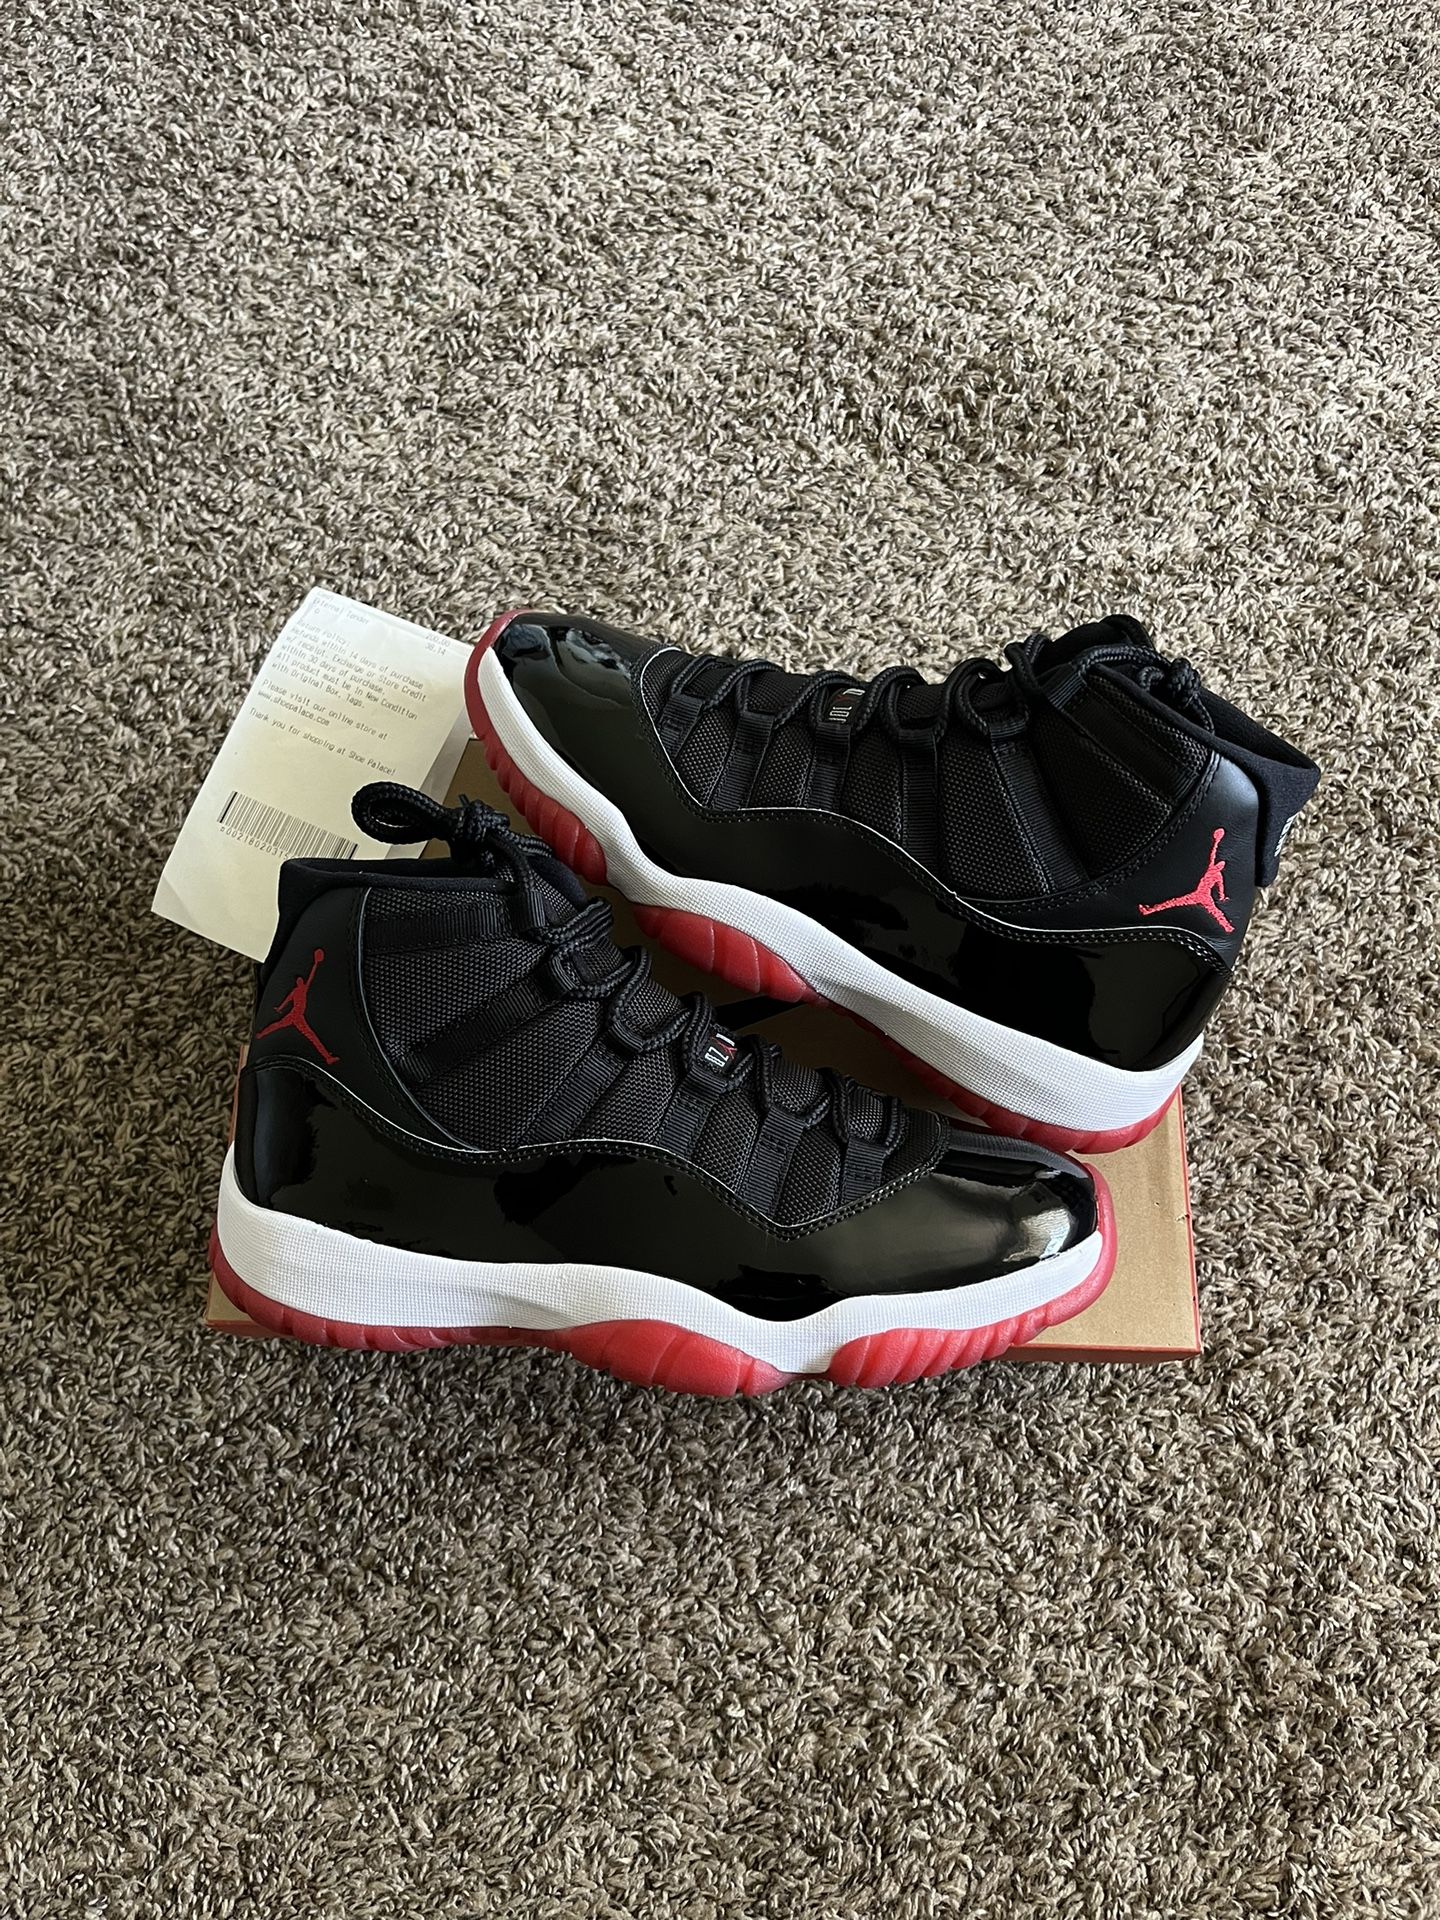 Bred 11s Size 10